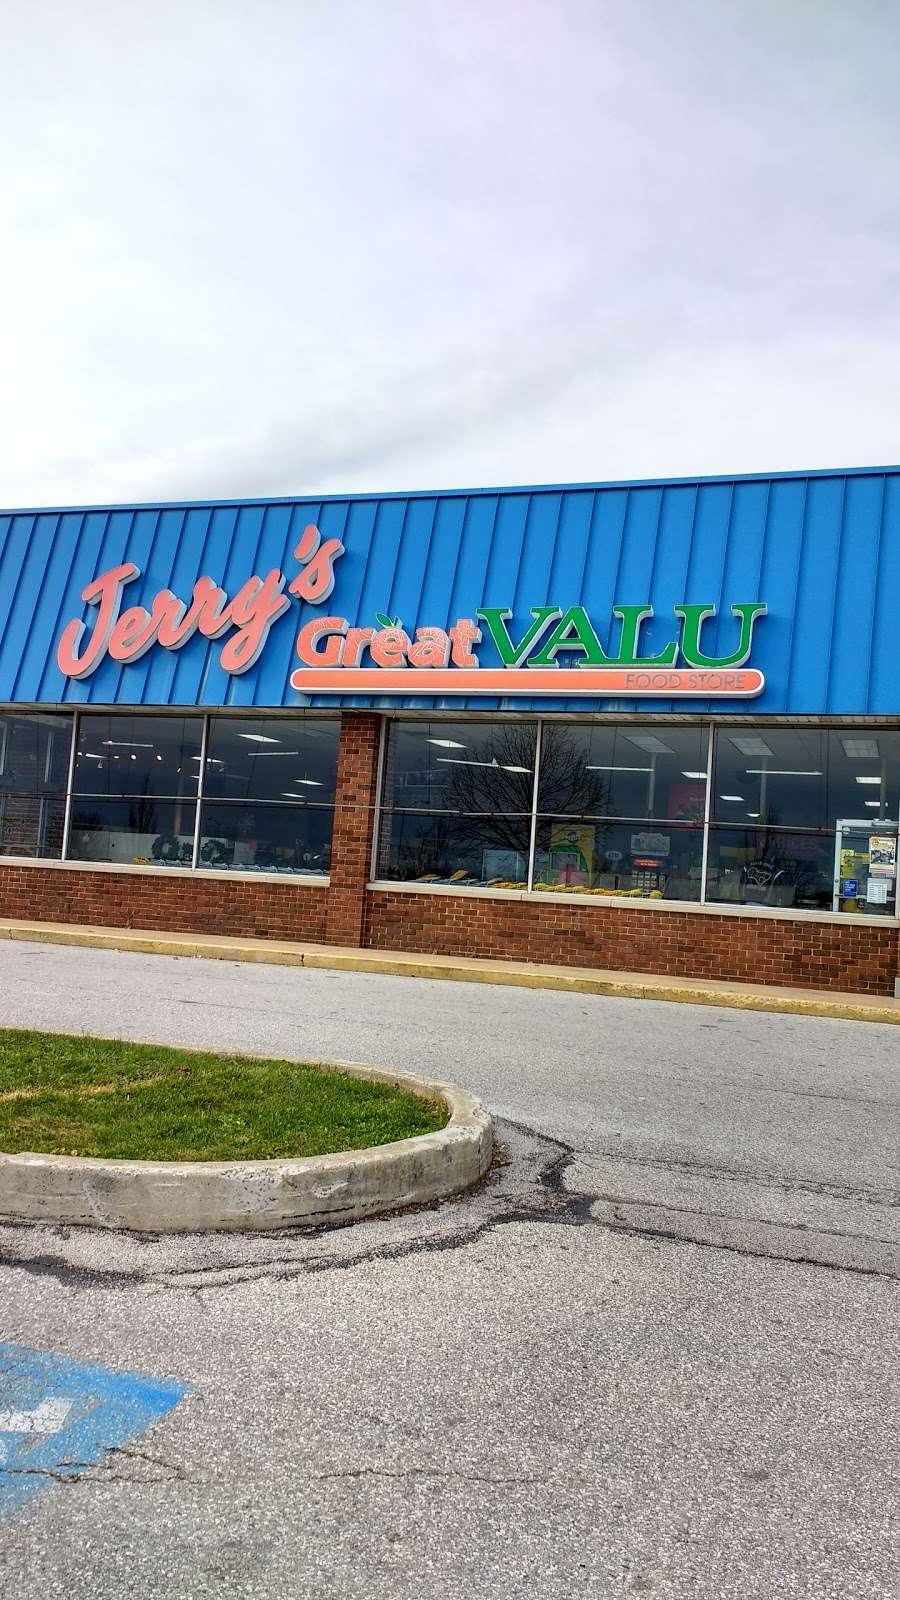 Jerrys Great Valu | 1 Dairyland Square, Red Lion, PA 17356, USA | Phone: (717) 244-7077